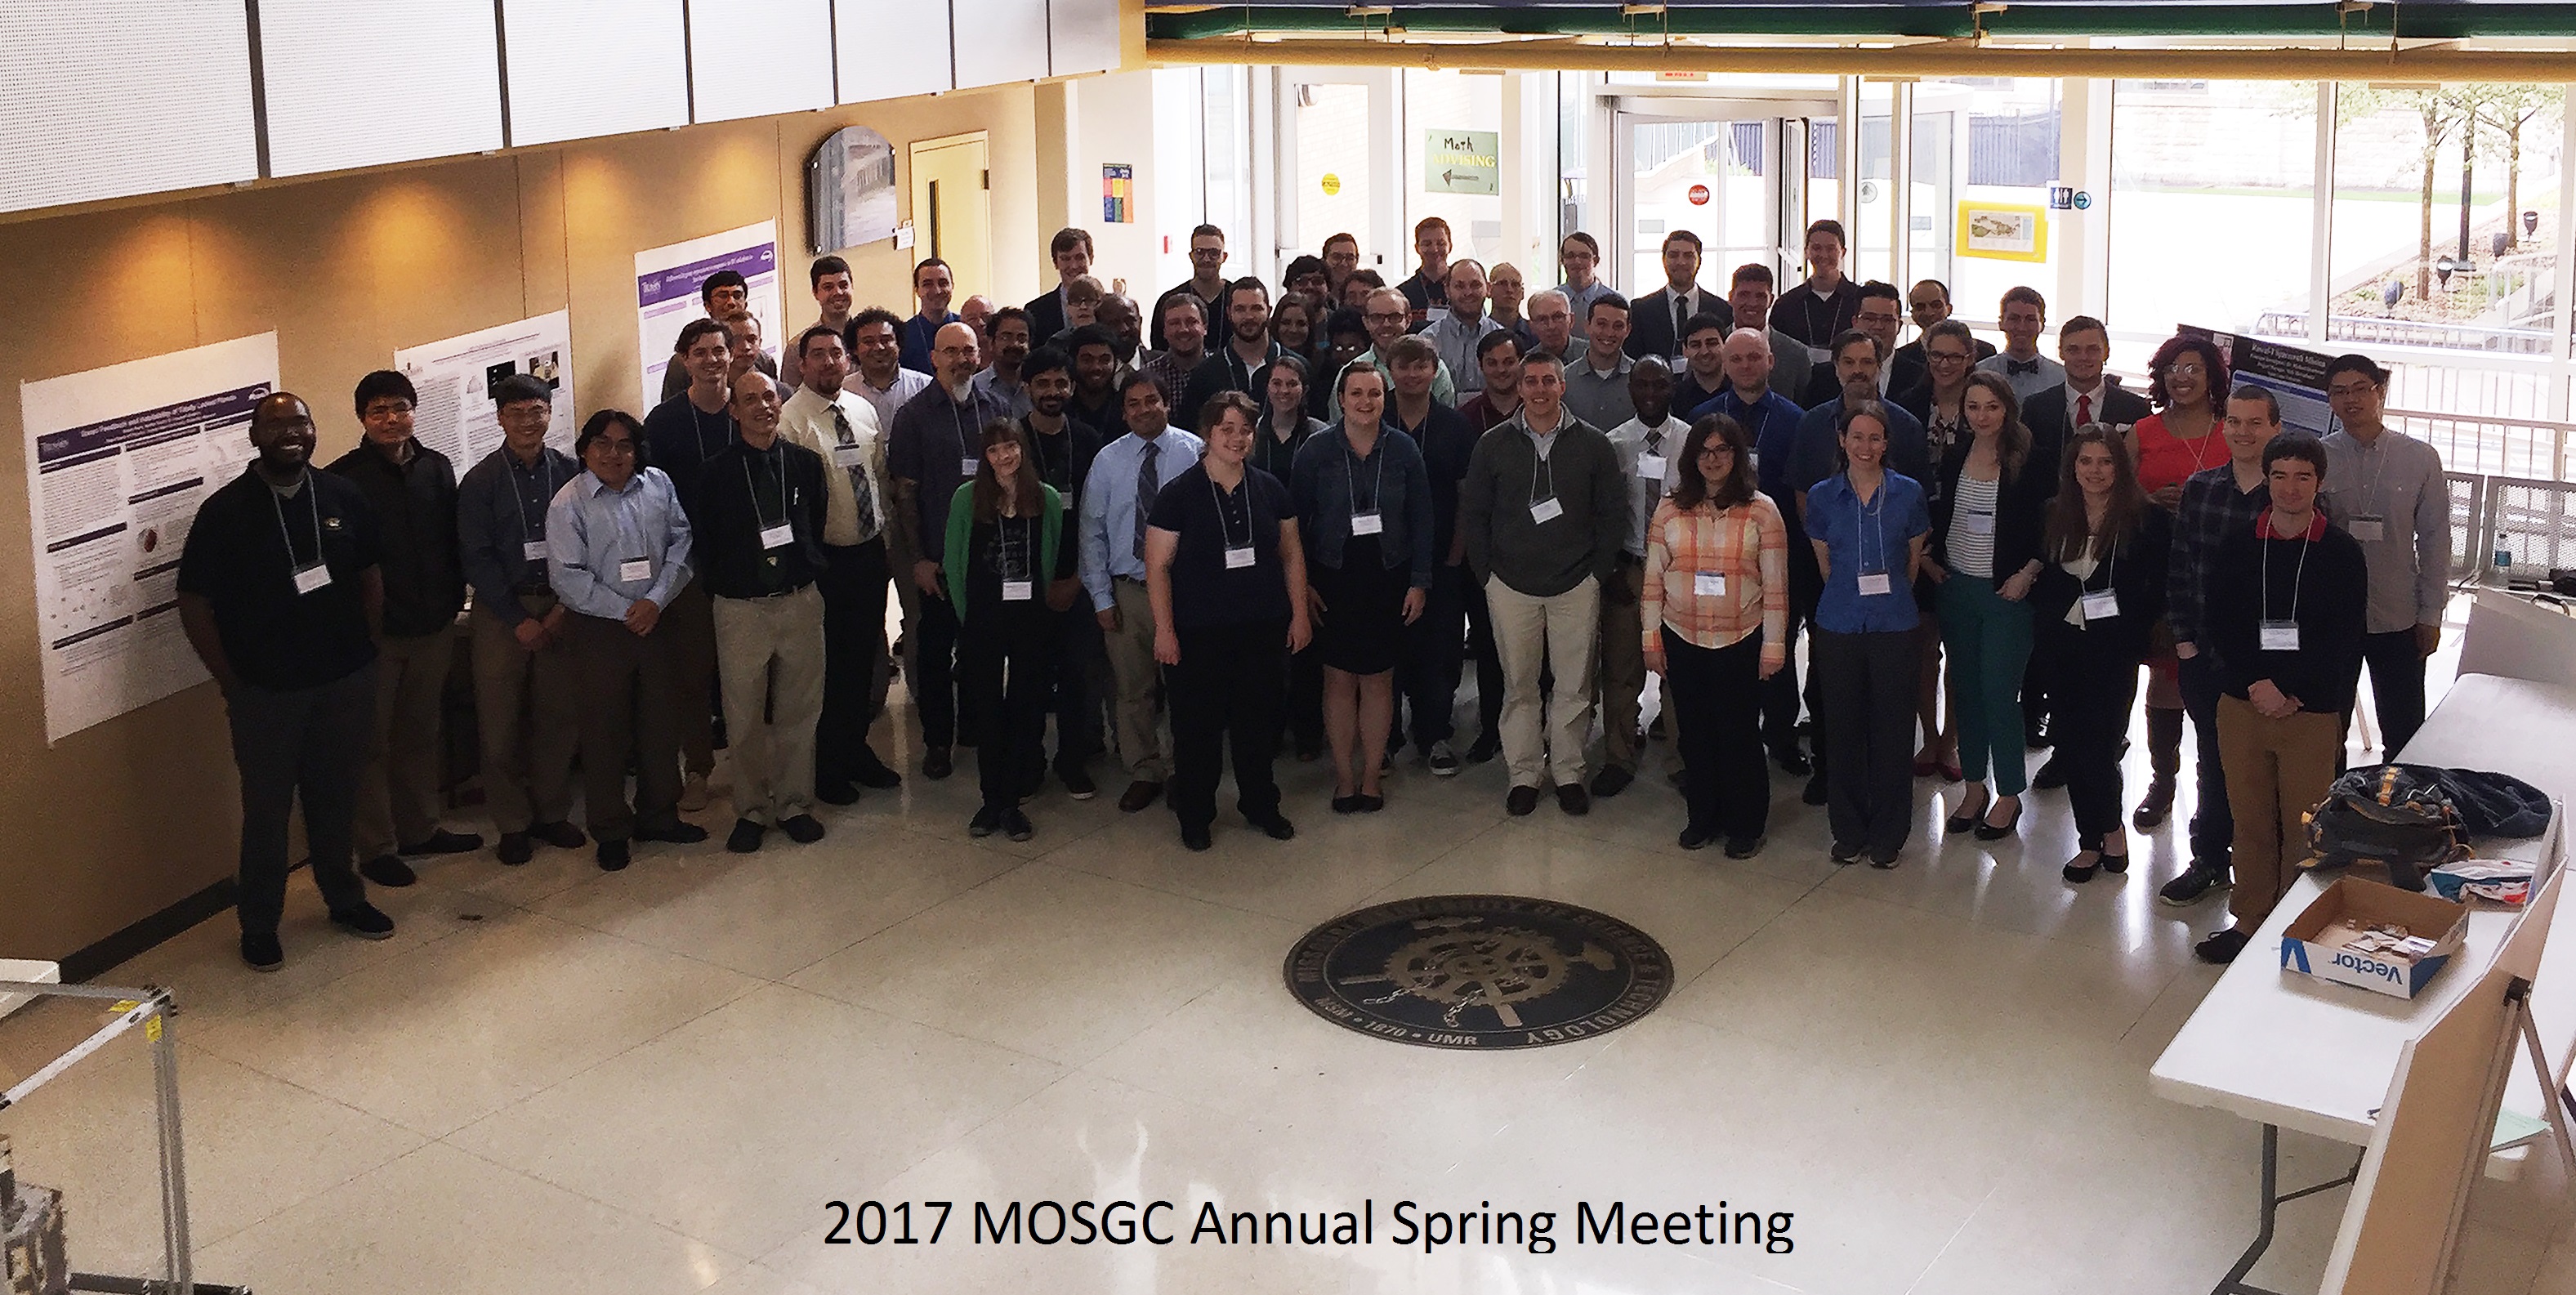 Group Photo of the 2017 MOSGC Annual Spring Meeting